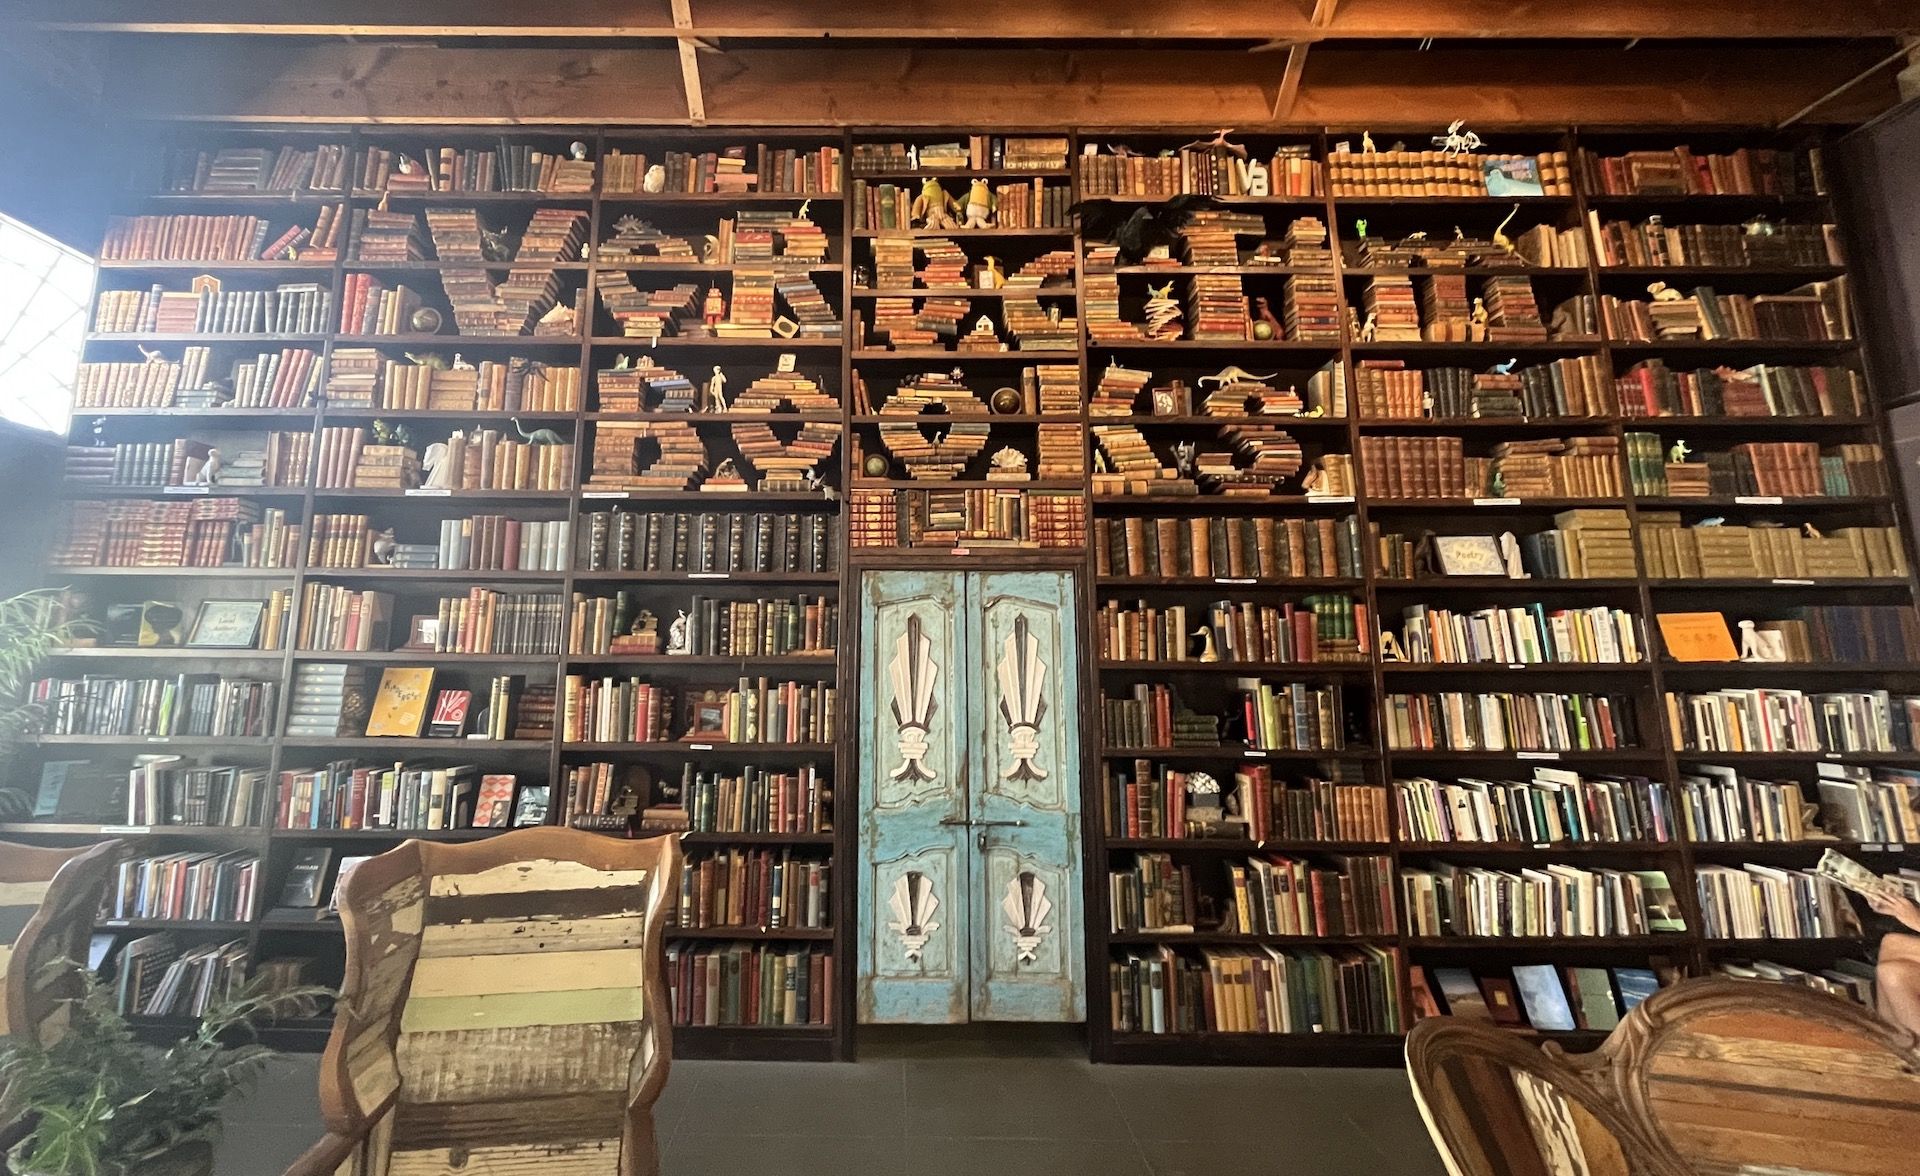 A bookshelf with "Verbatim Books" spelled out in books.